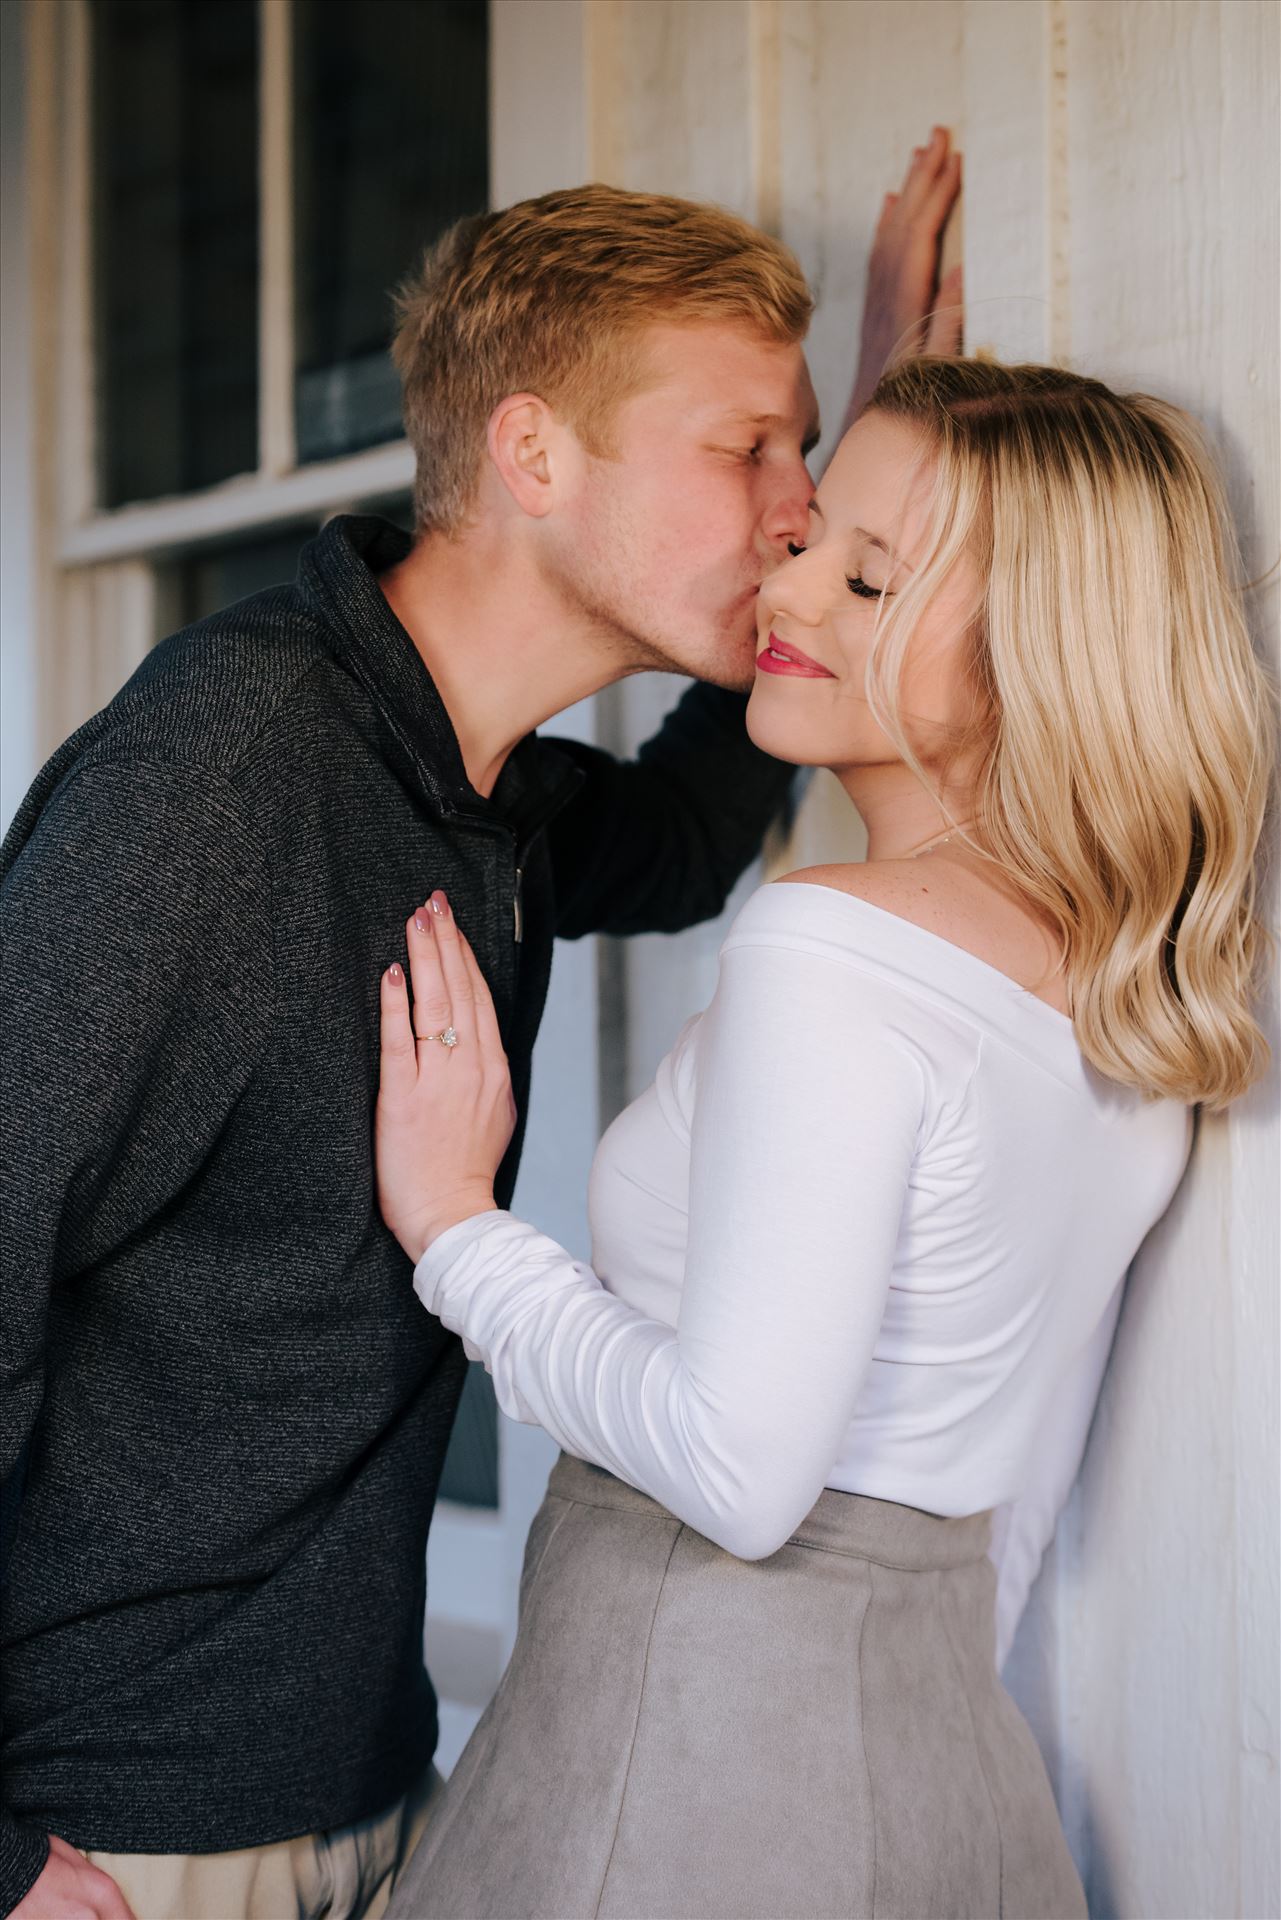 DSC_2887.JPG - San Luis Obispo and Santa Barbara County Wedding and Engagement Photography. Mirror's Edge Photography captures Montana de Oro Engagement Session.  The kiss. by Sarah Williams